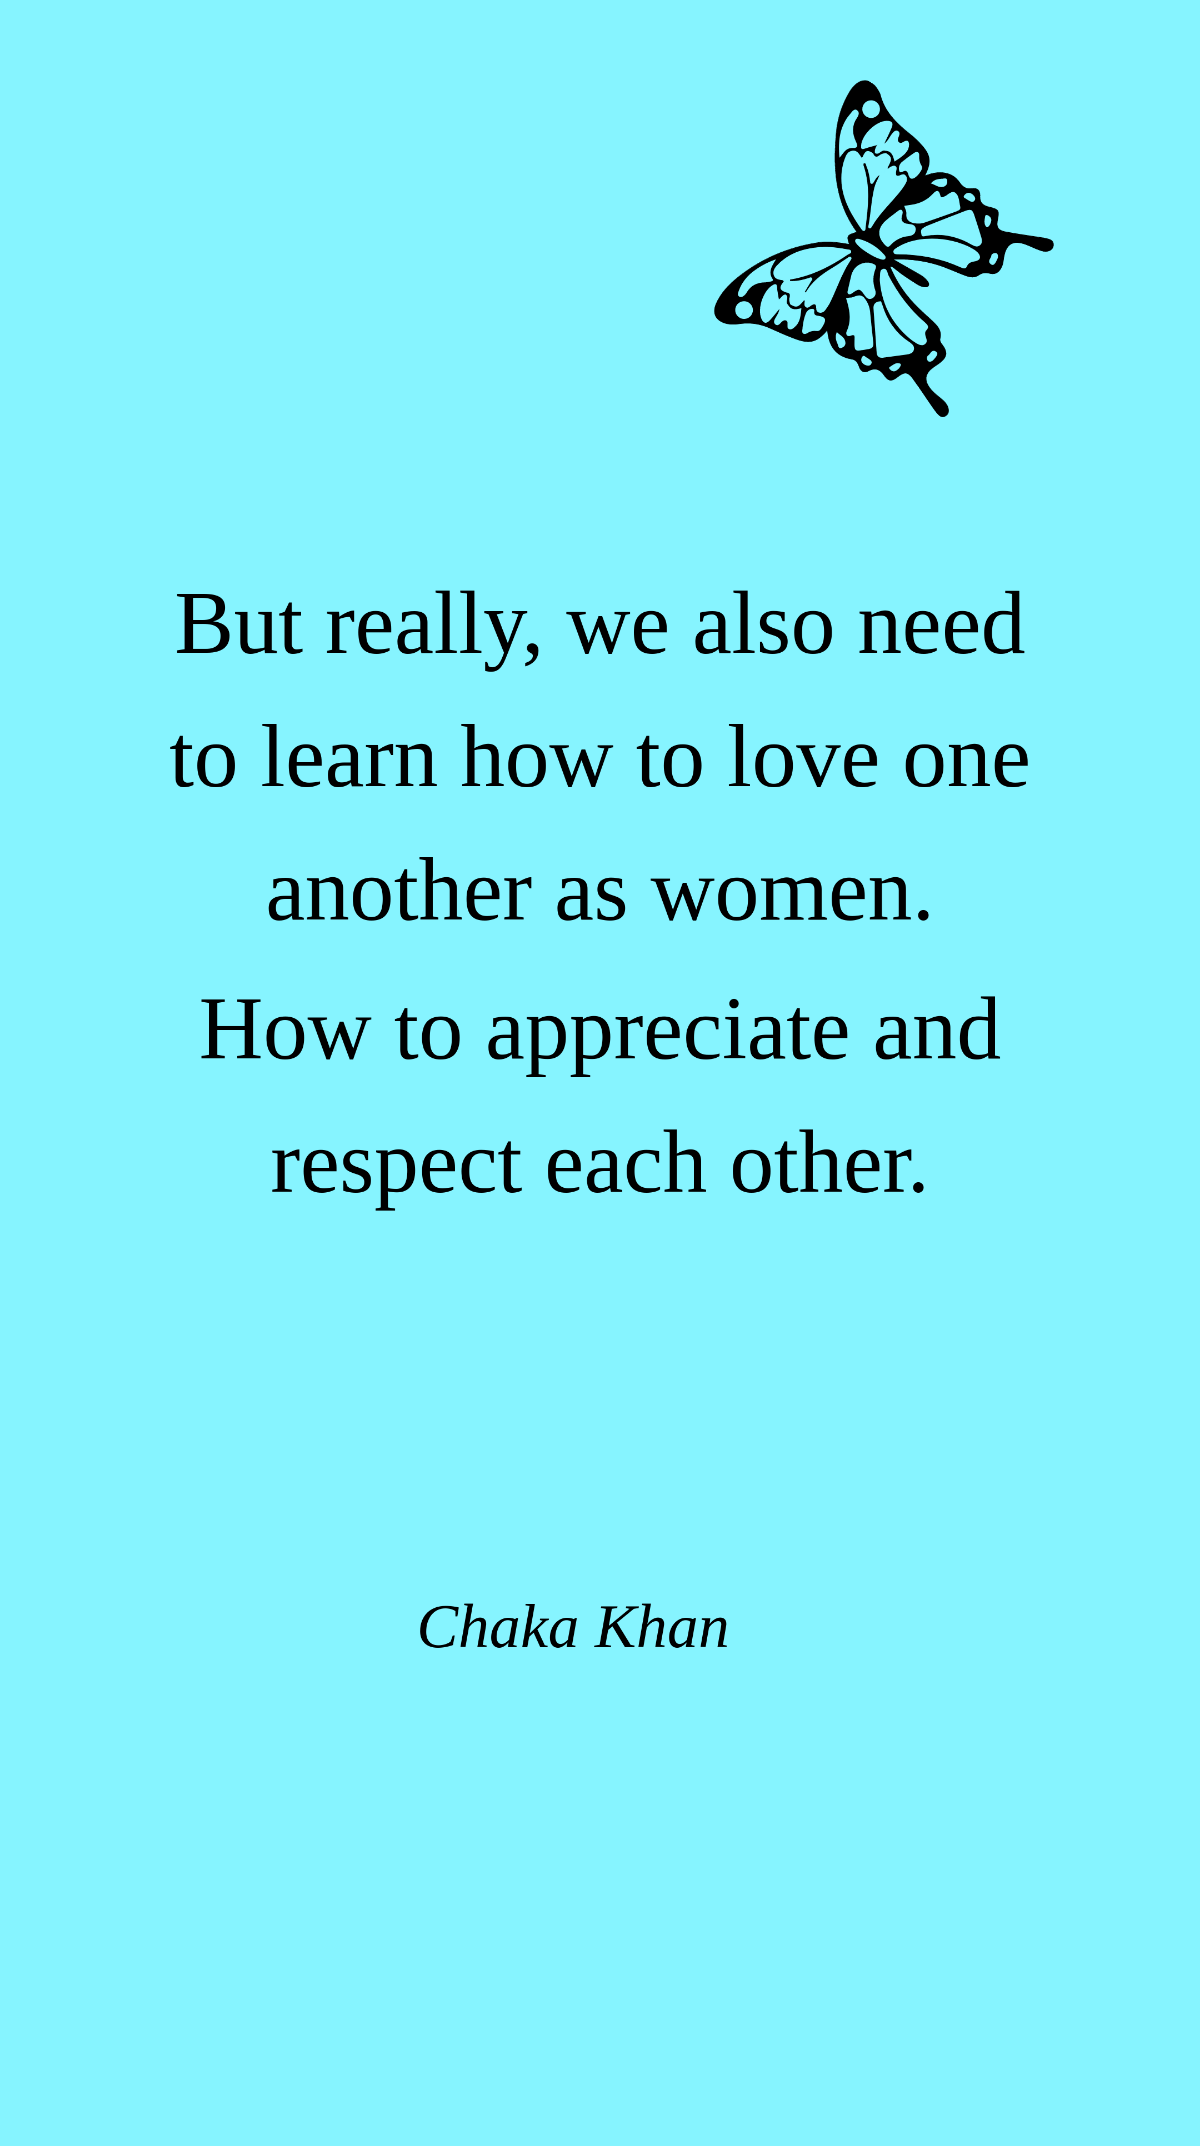 Chaka Khan- But really, we also need to learn how to love one another as women. How to appreciate and respect each other. Template